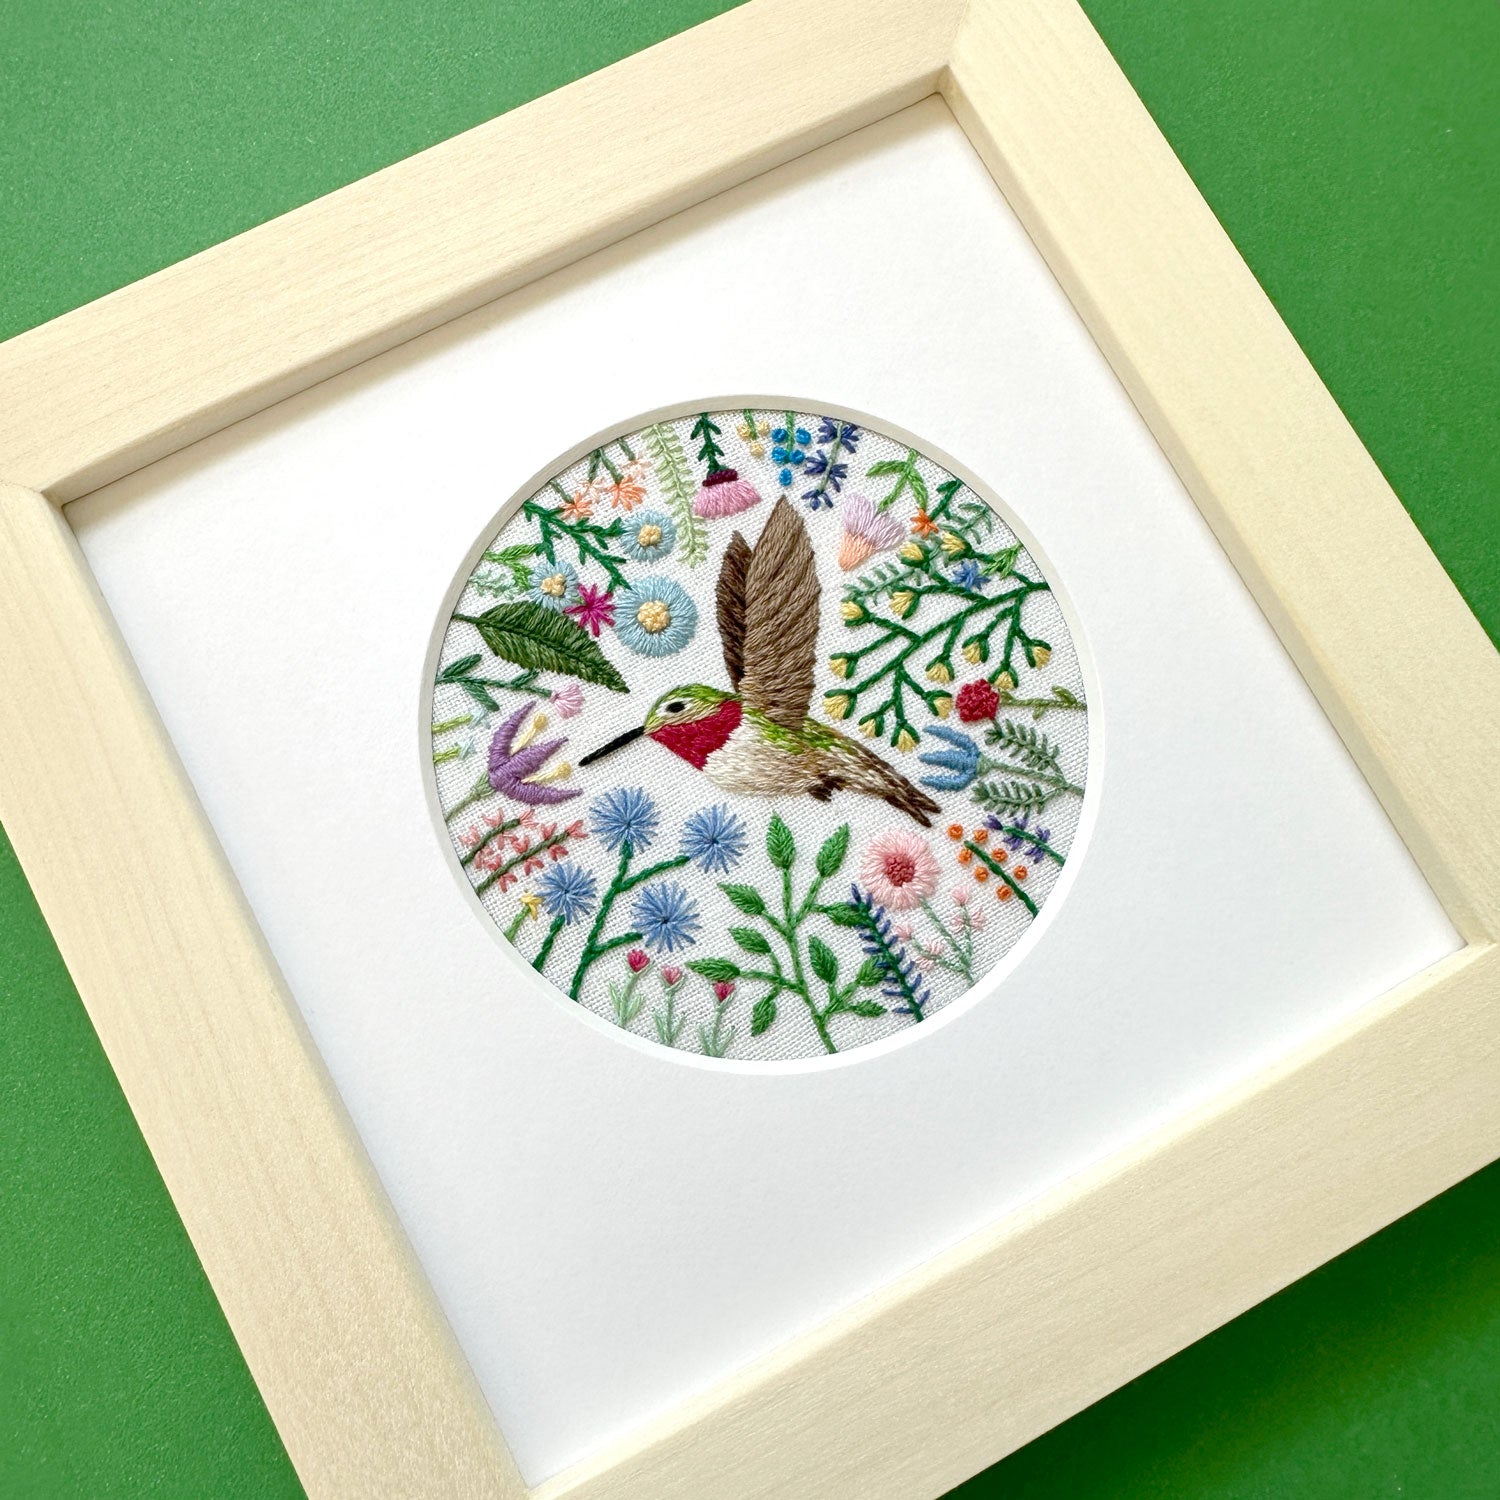 Hummingbird and Flowers on White Linen Hand Embroidered Art